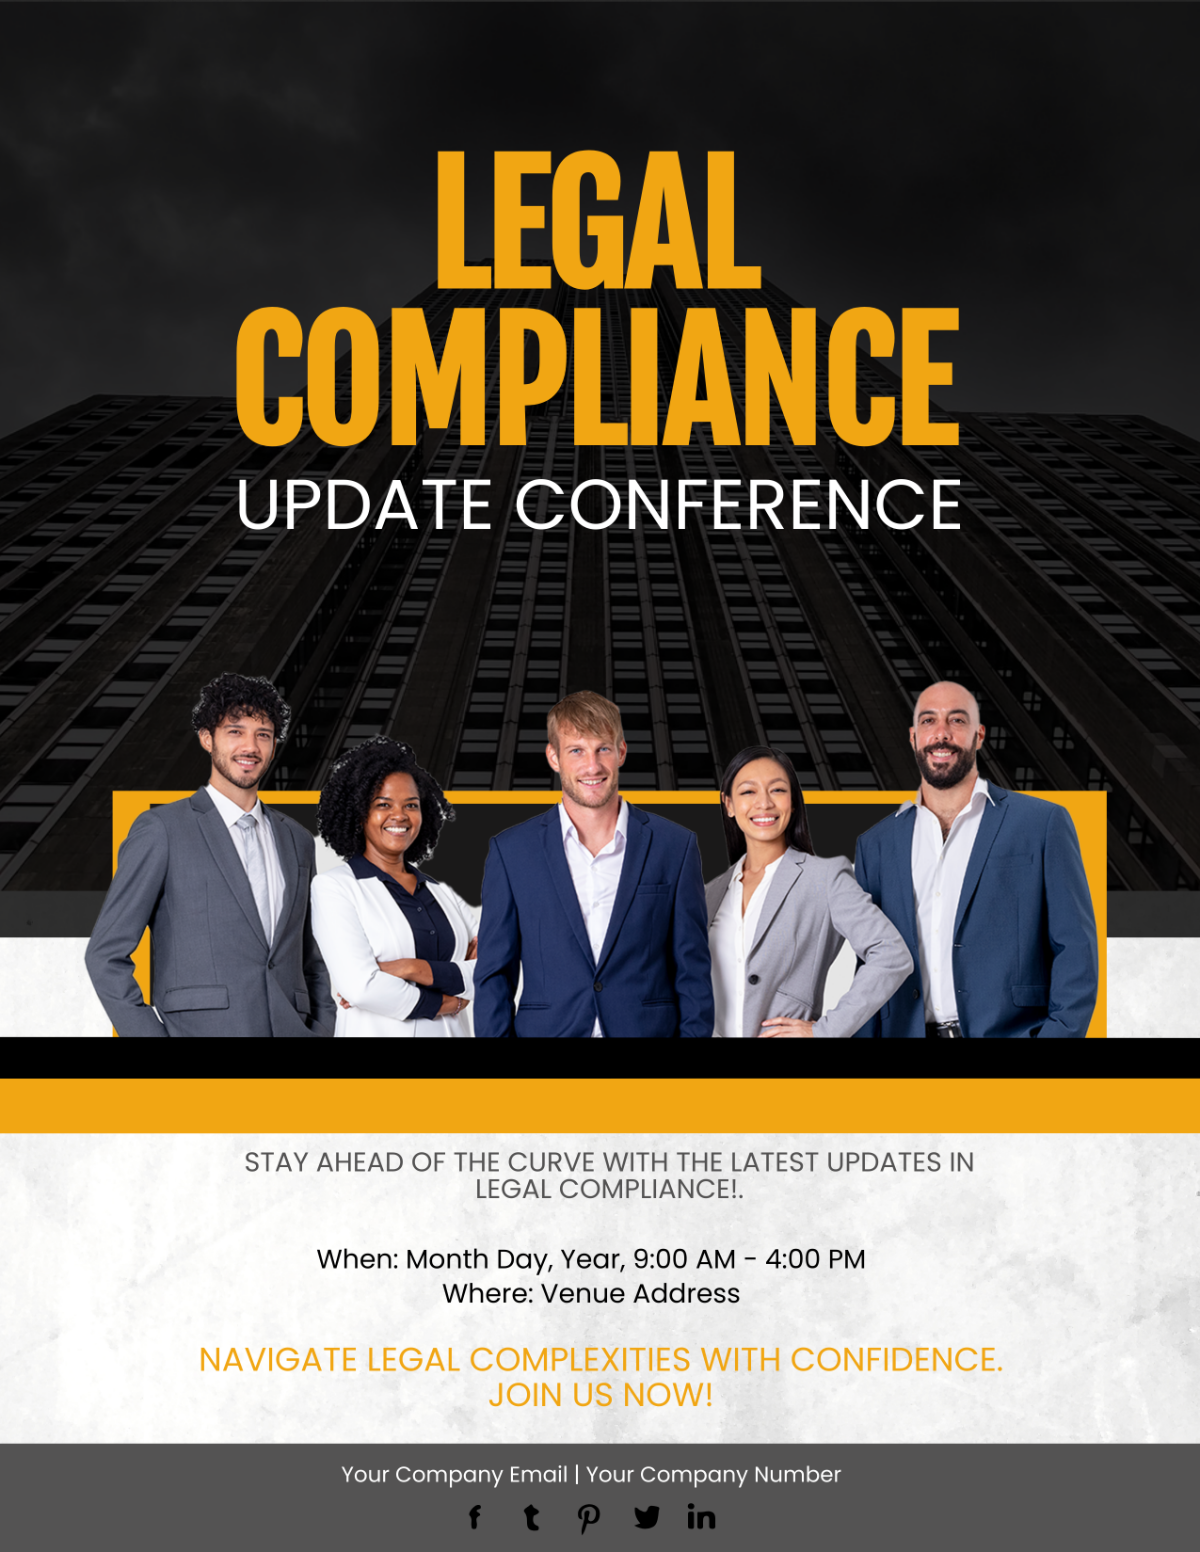 Legal Compliance Update Conference Flyer Template